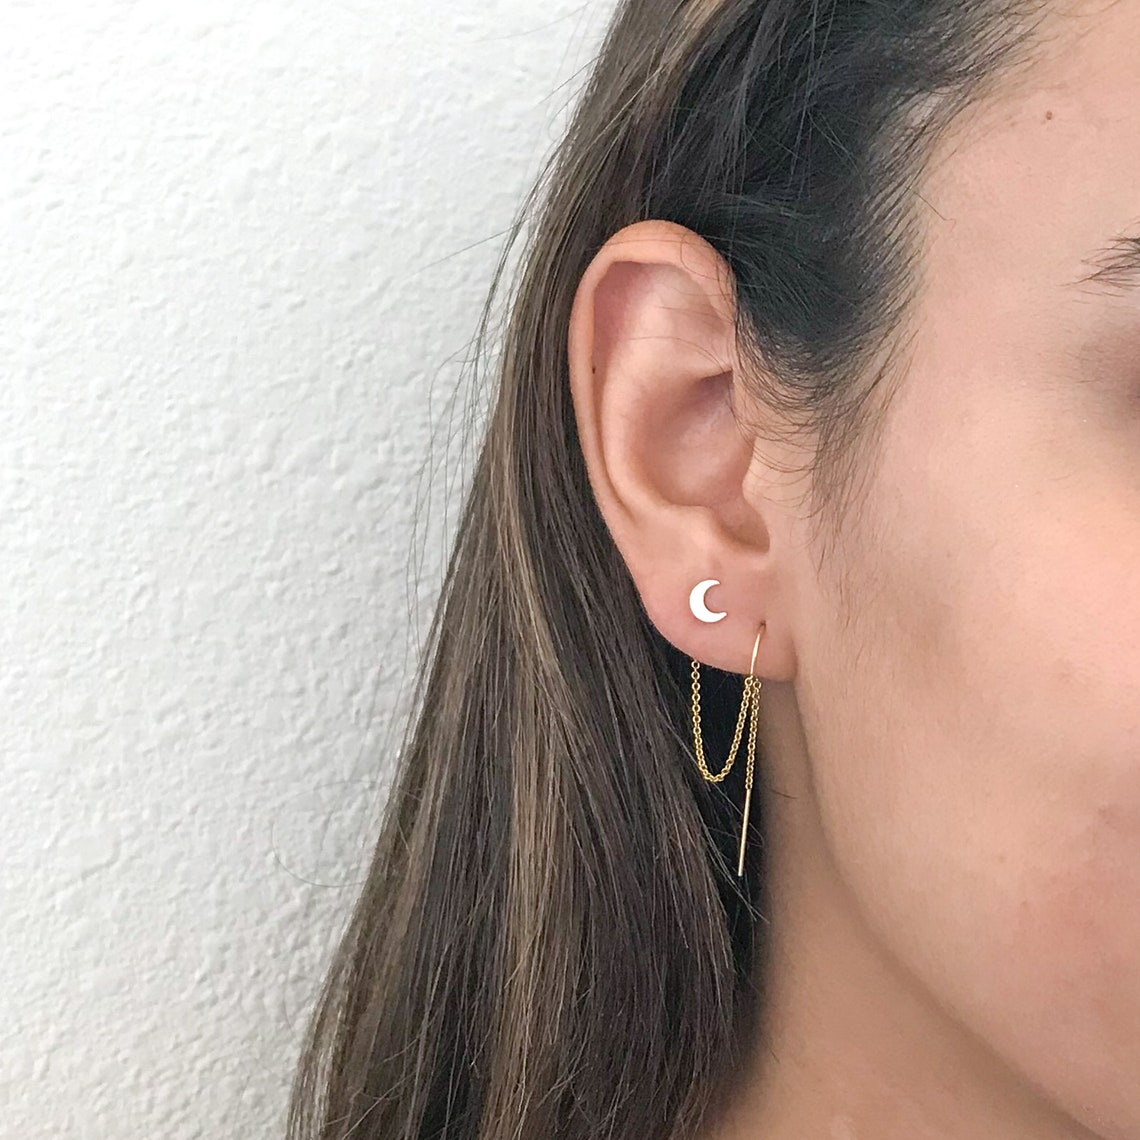 Star and Moon Double Piercing Threader Earrings - 14k Gold Filled